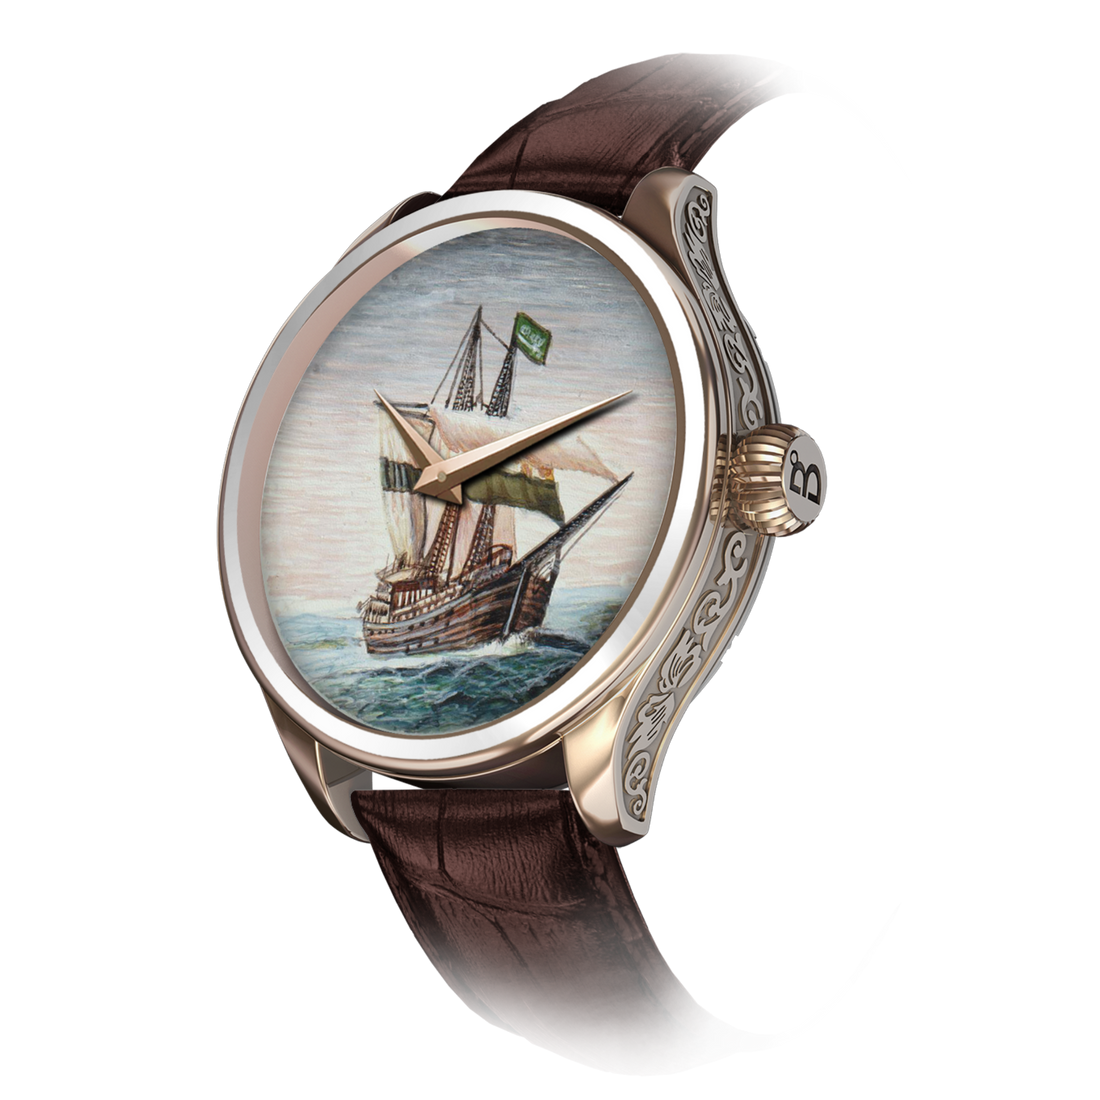 We invite you to embrace the artistry, individuality, and splendor of your B360 watch from the "Glorious Gulf" collection. It is a symbol of the remarkable craftsmanship and the captivating spirit of the Gulf's maritime heritage.